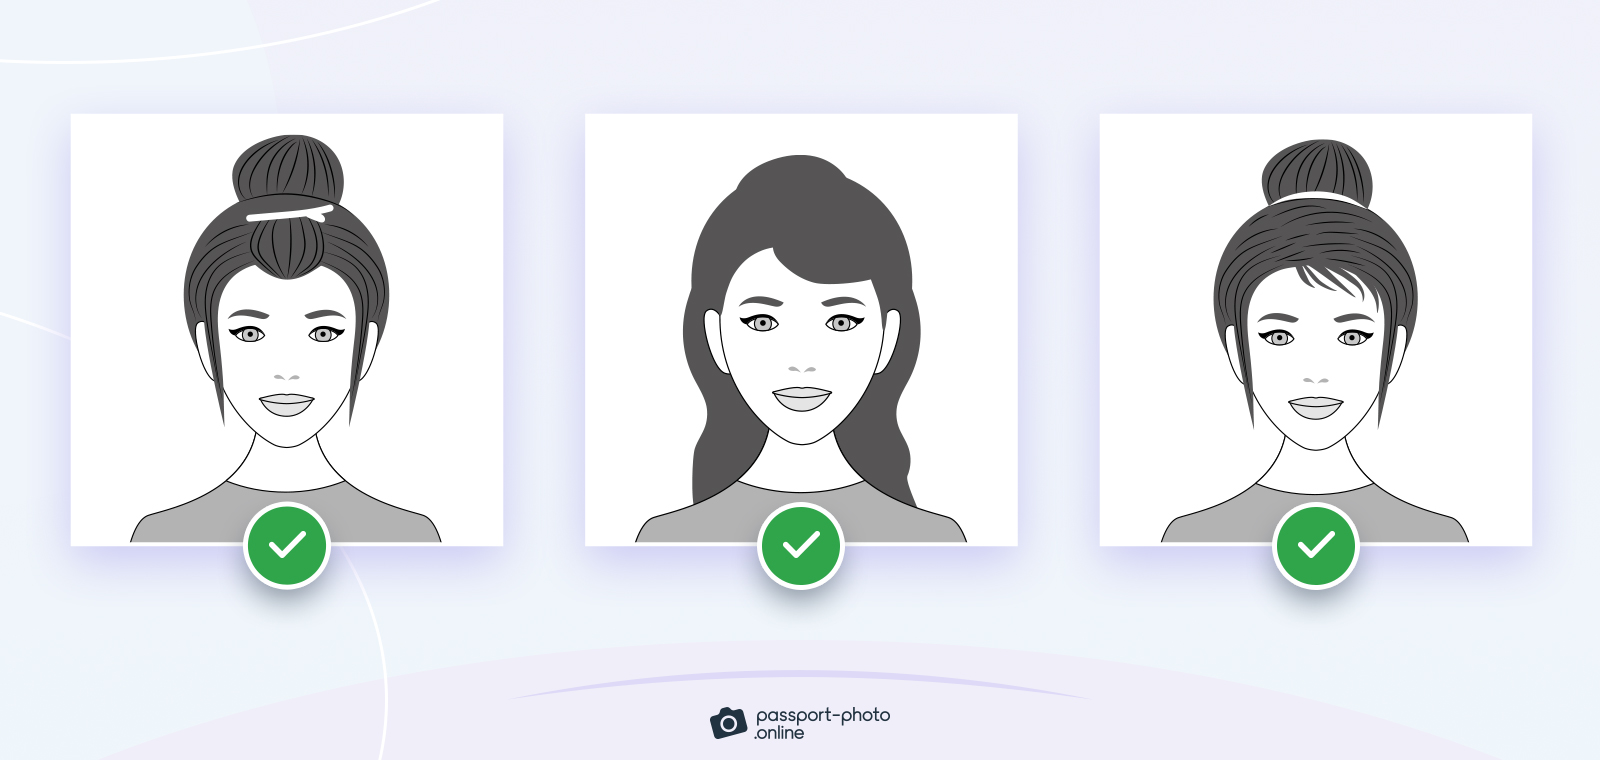 Examples of passport photos with acceptable hairstyles and hair accessories.